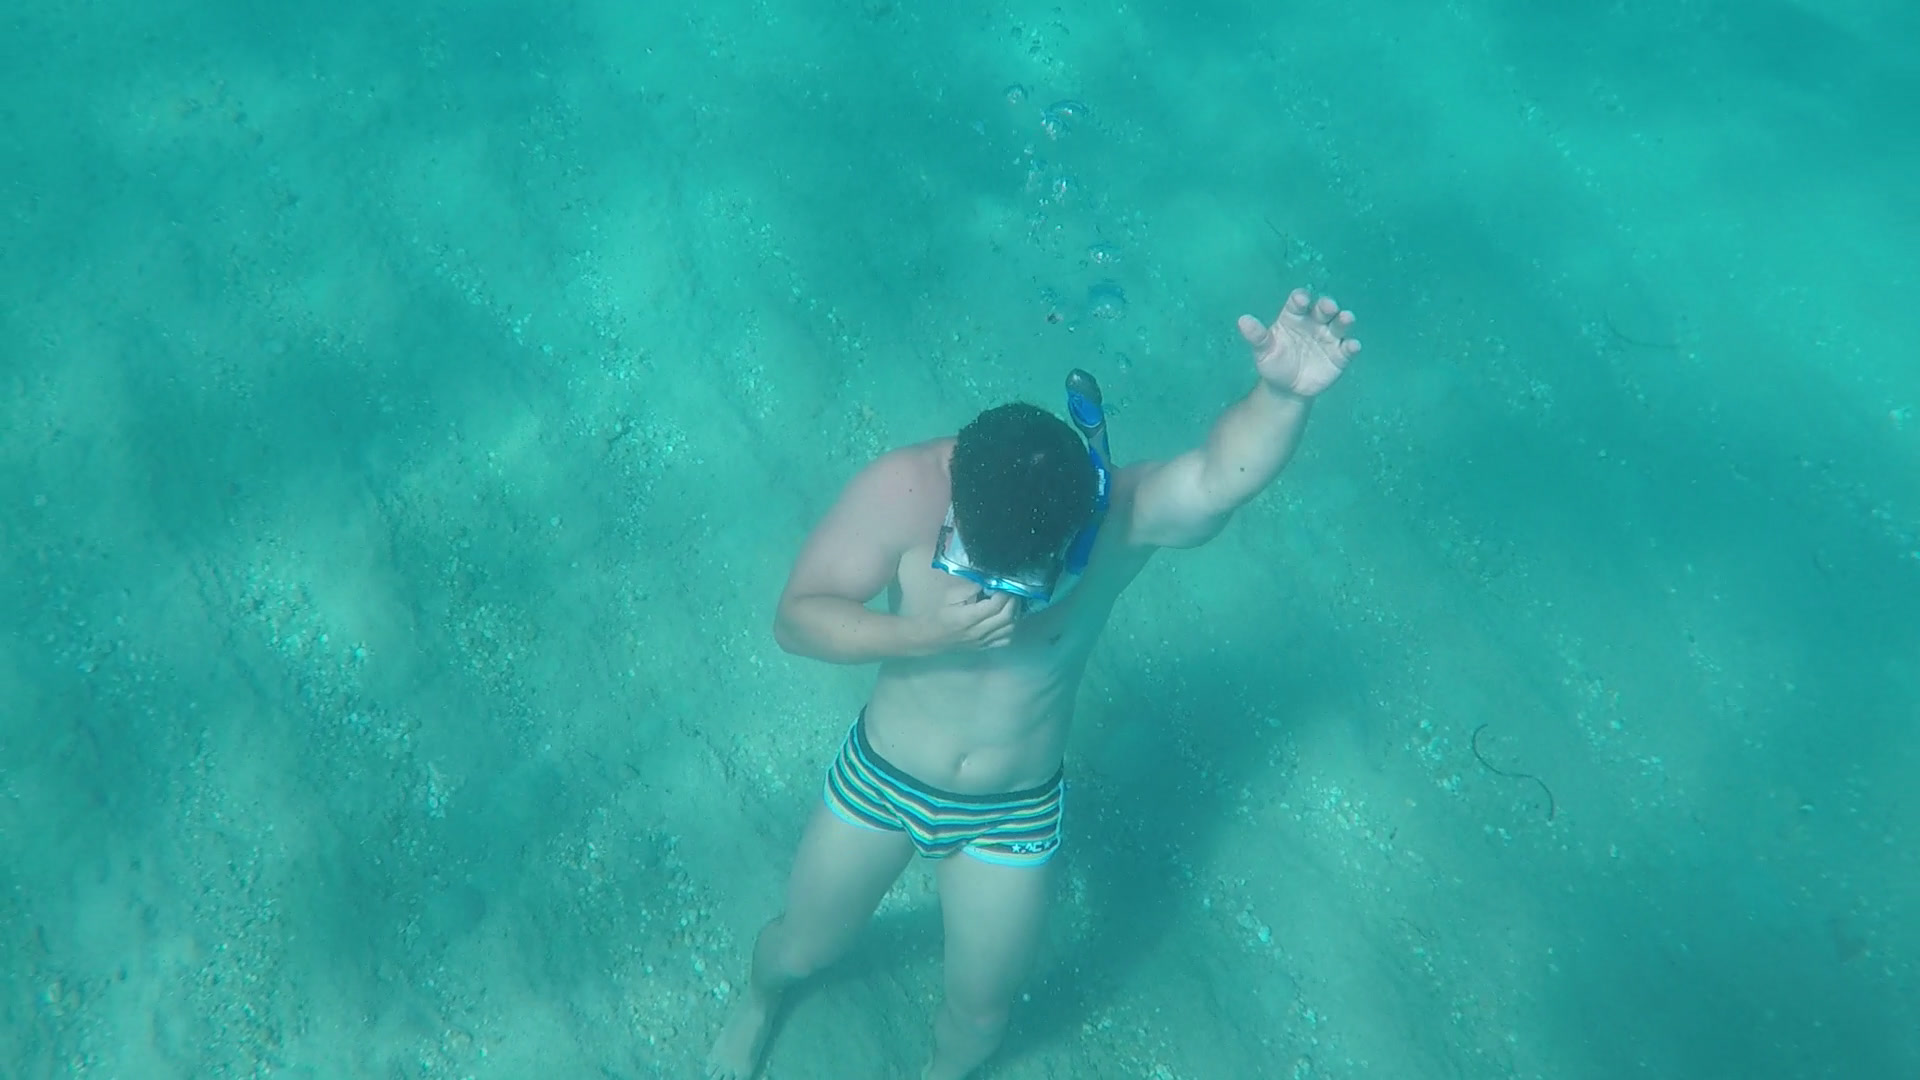 Doing some breathing exercises under water.